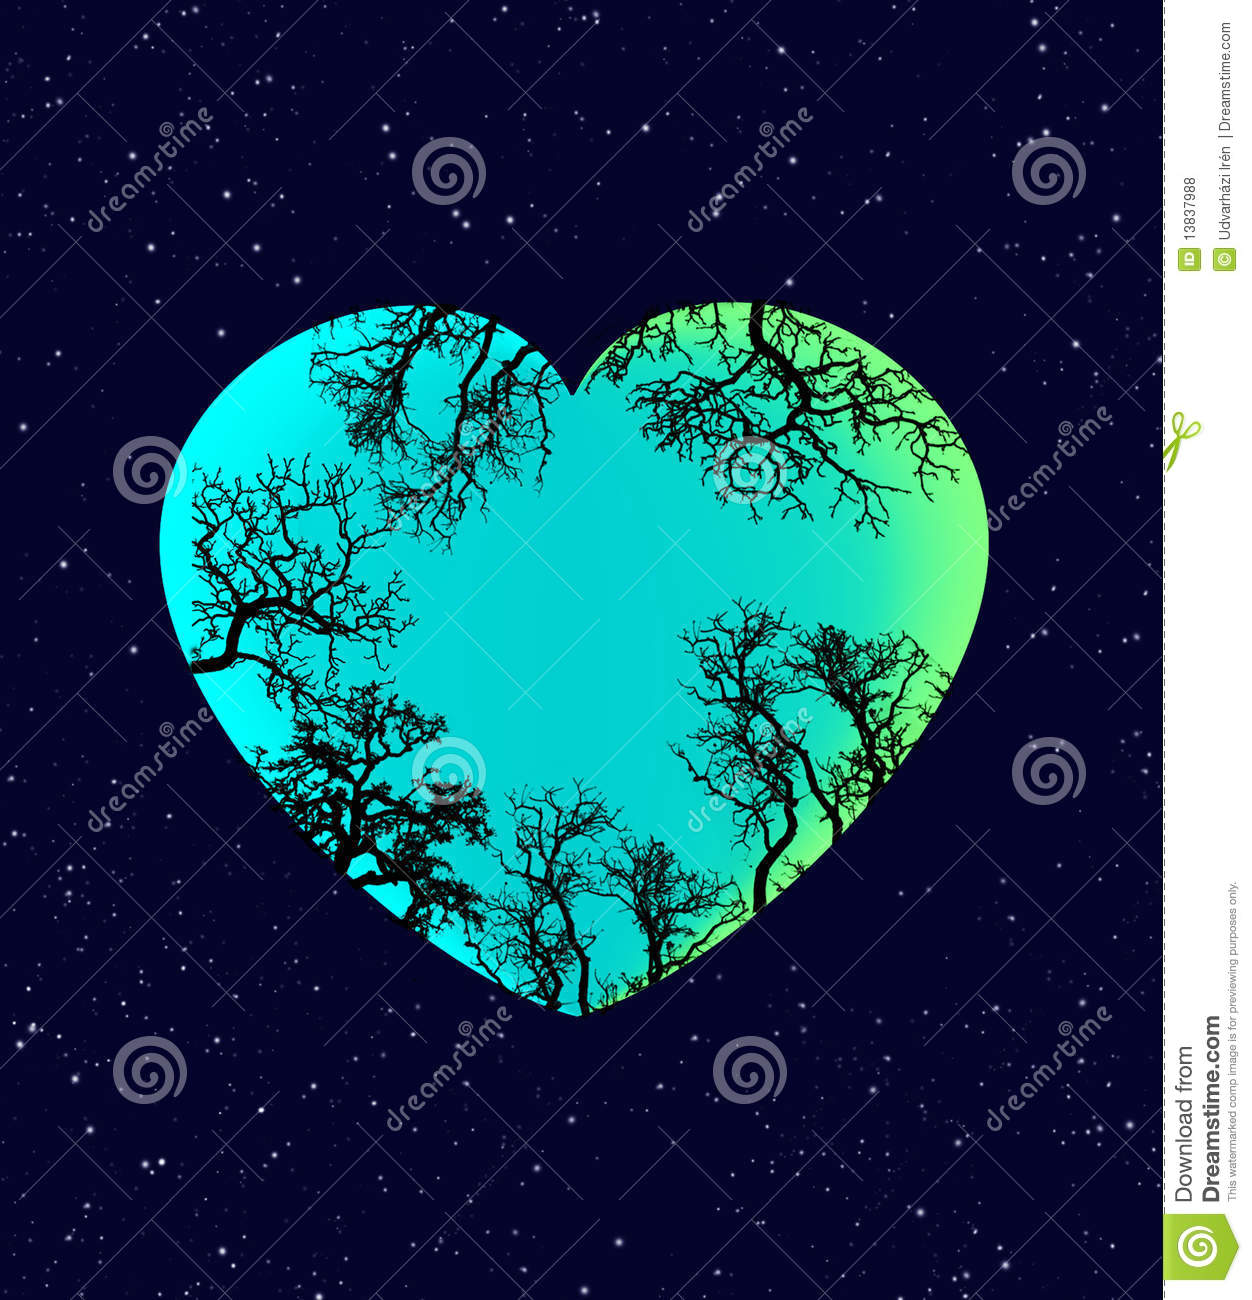 Earth And Heart Illustration Royalty Free Stock Photos   Image